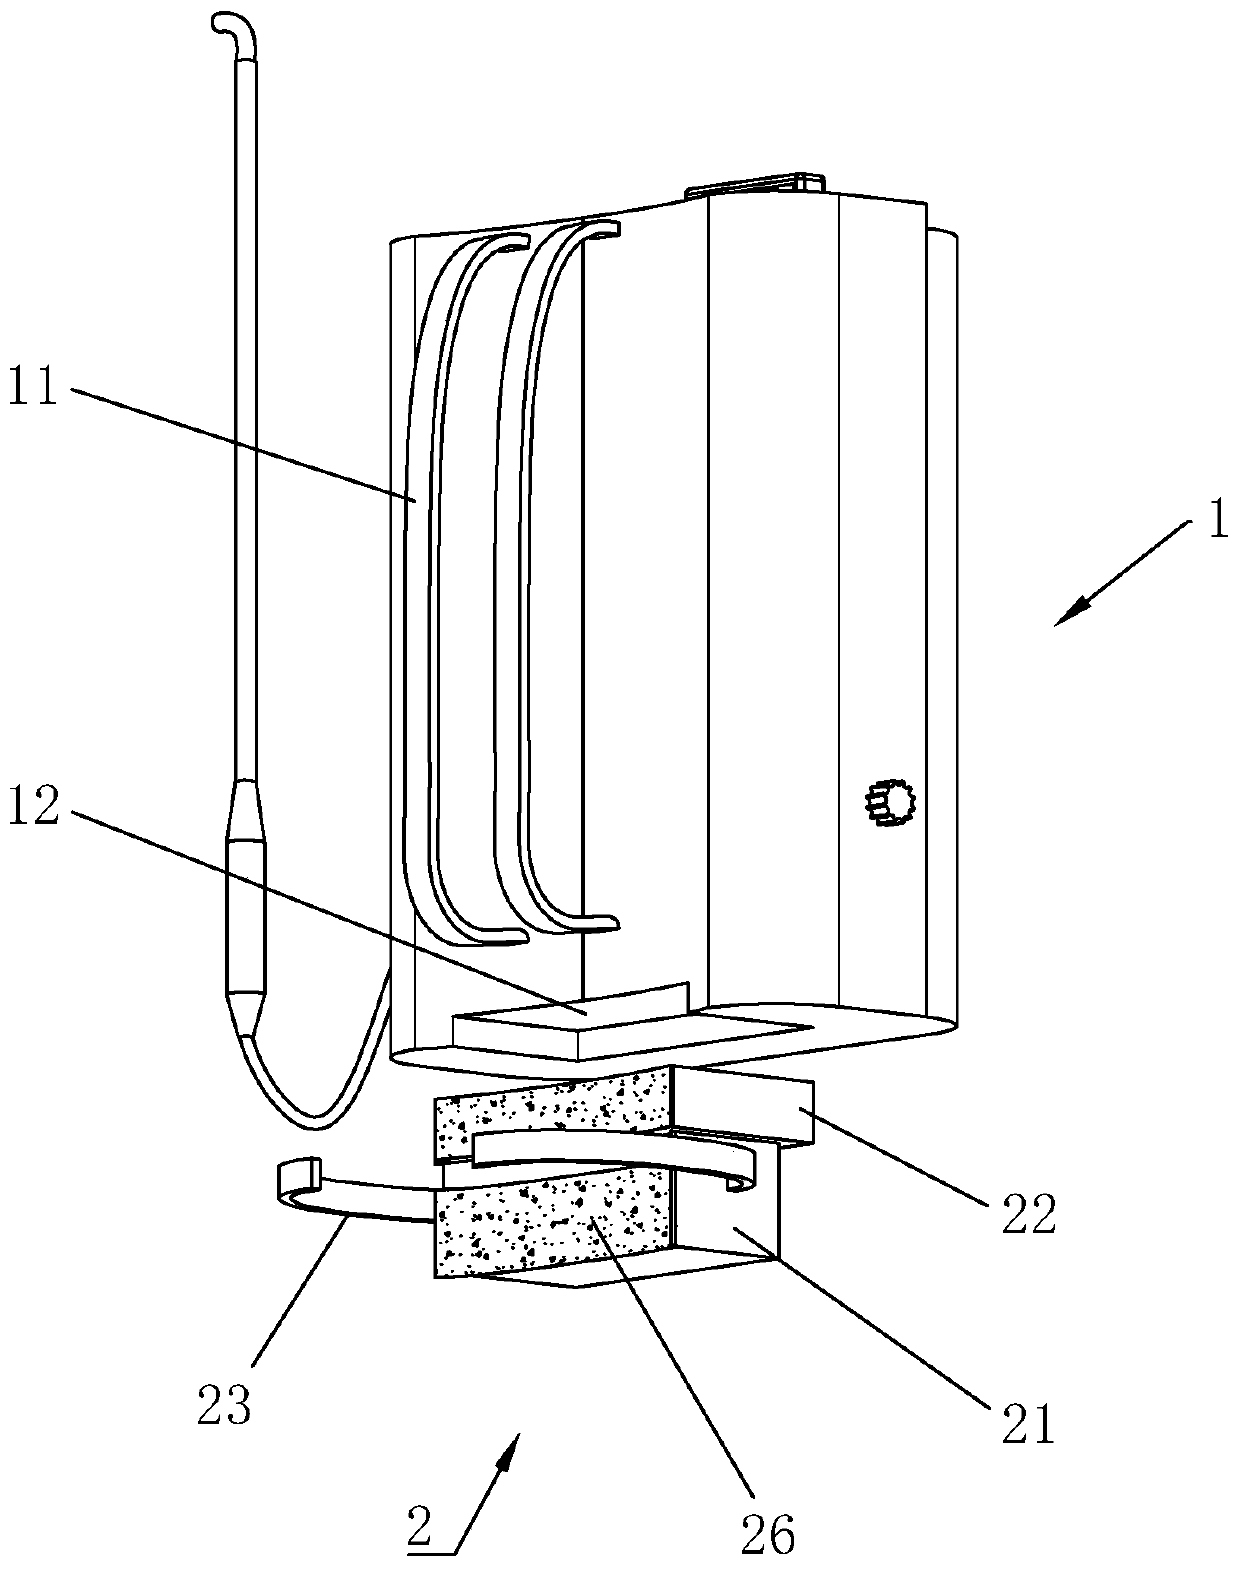 Device for reducing load of farmer carrying medicine box